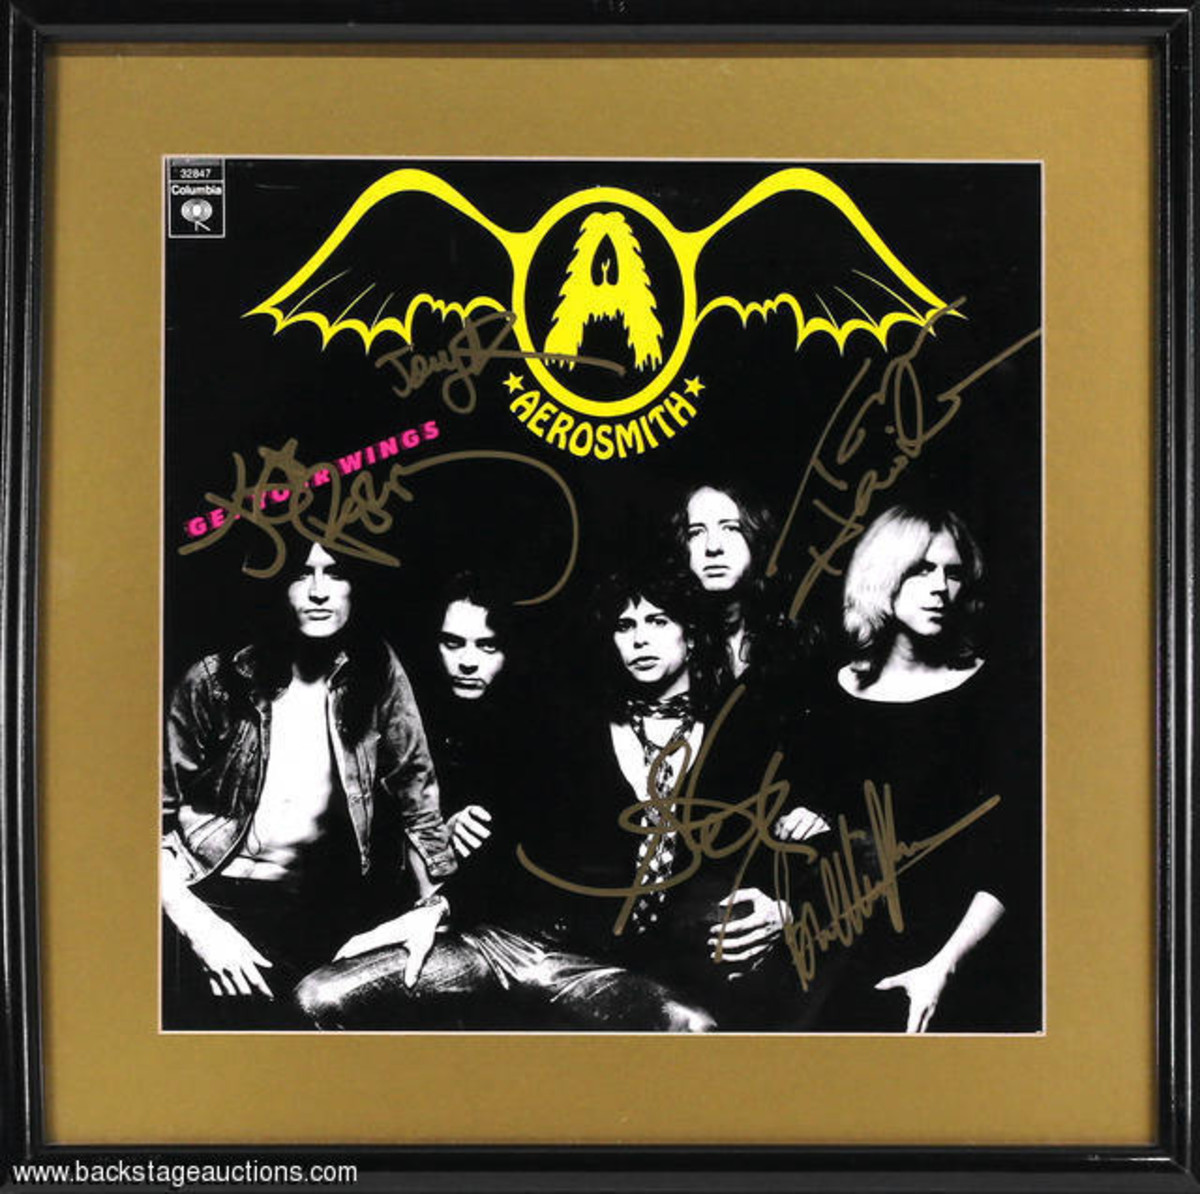  A fully band signed Aerosmith 'Get Your Wings' LP cover from 1974, featuring the autographs of Steven Tyler, Joe Perry, Tom Hamilton, Joey Kramer and Brad Whitford. All signatures are nicely done with a gold marker. The album cover is matted and housed in a 16 1/2 x 16 1/2 inch frame. Excellent condition. From the the private collection of David Frangioni.